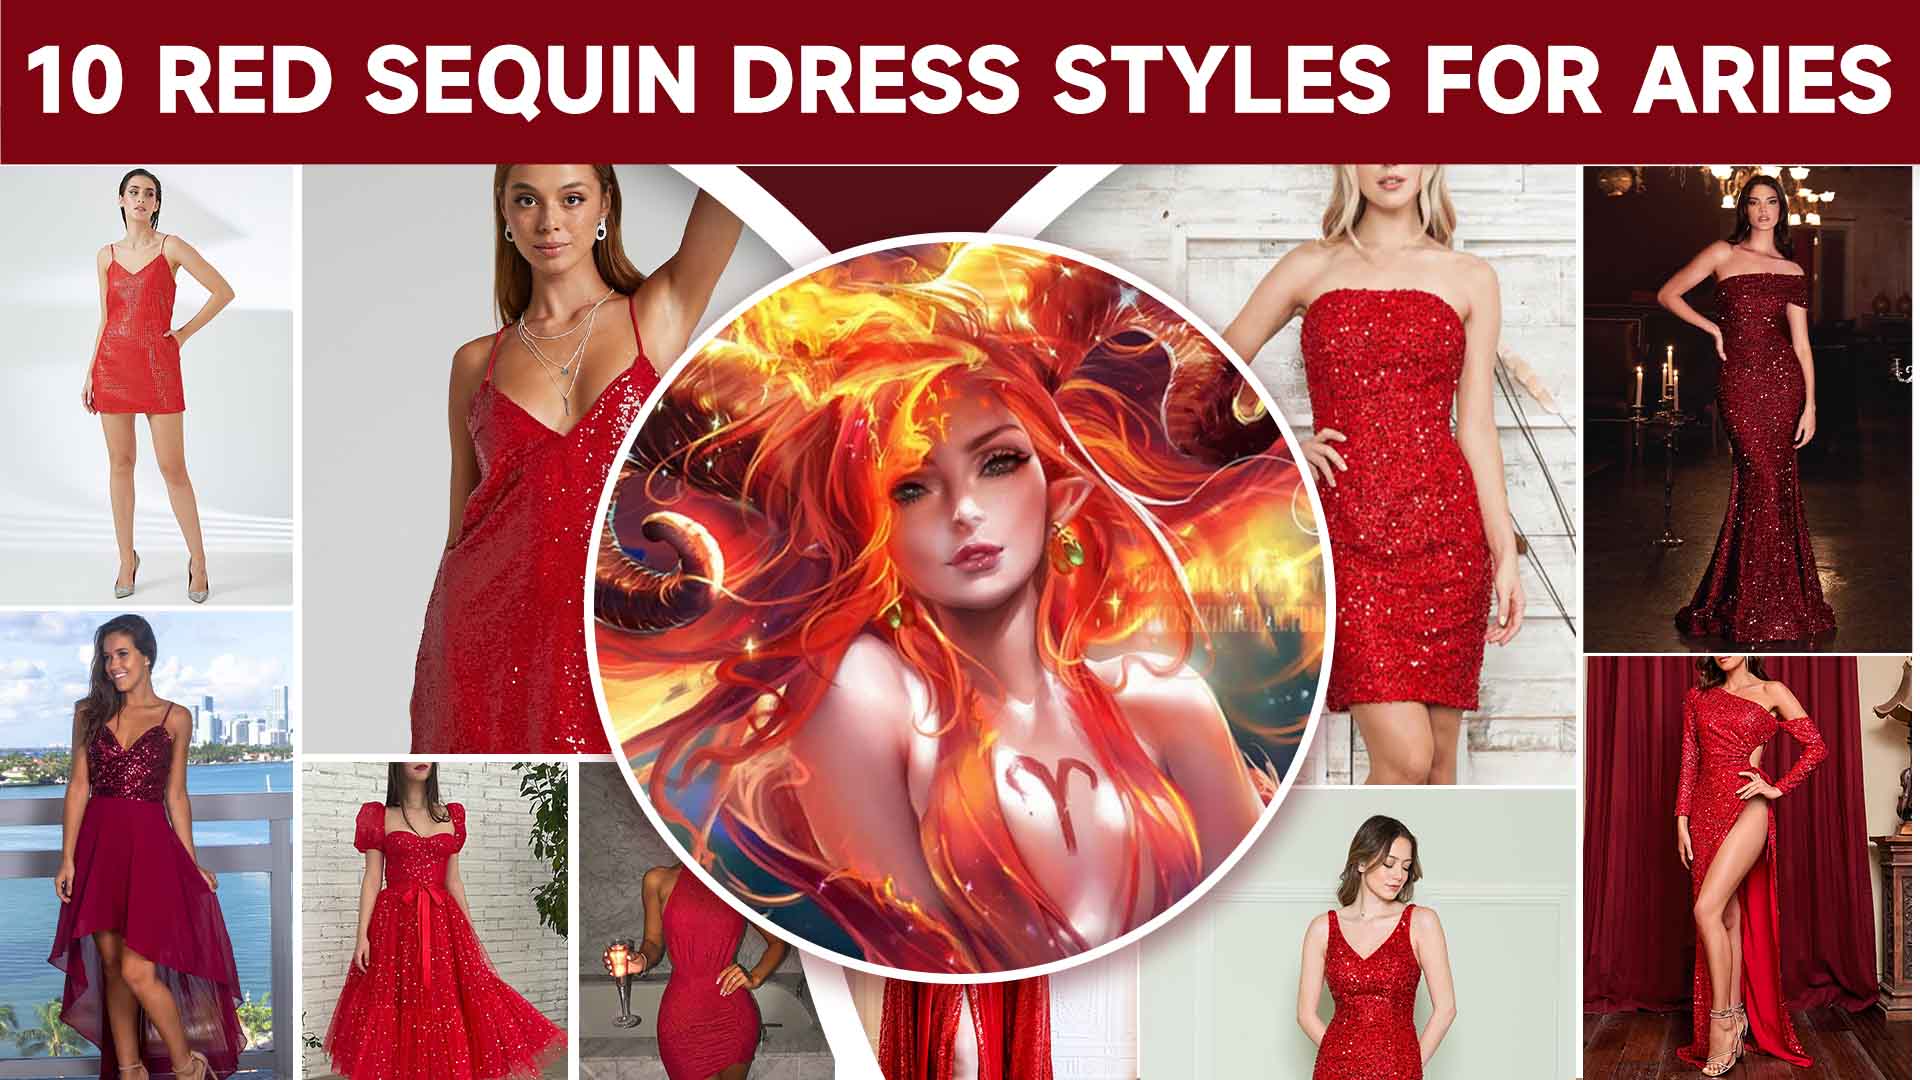 10 RED SEQUIN DRESS STYLES FOR ARIES